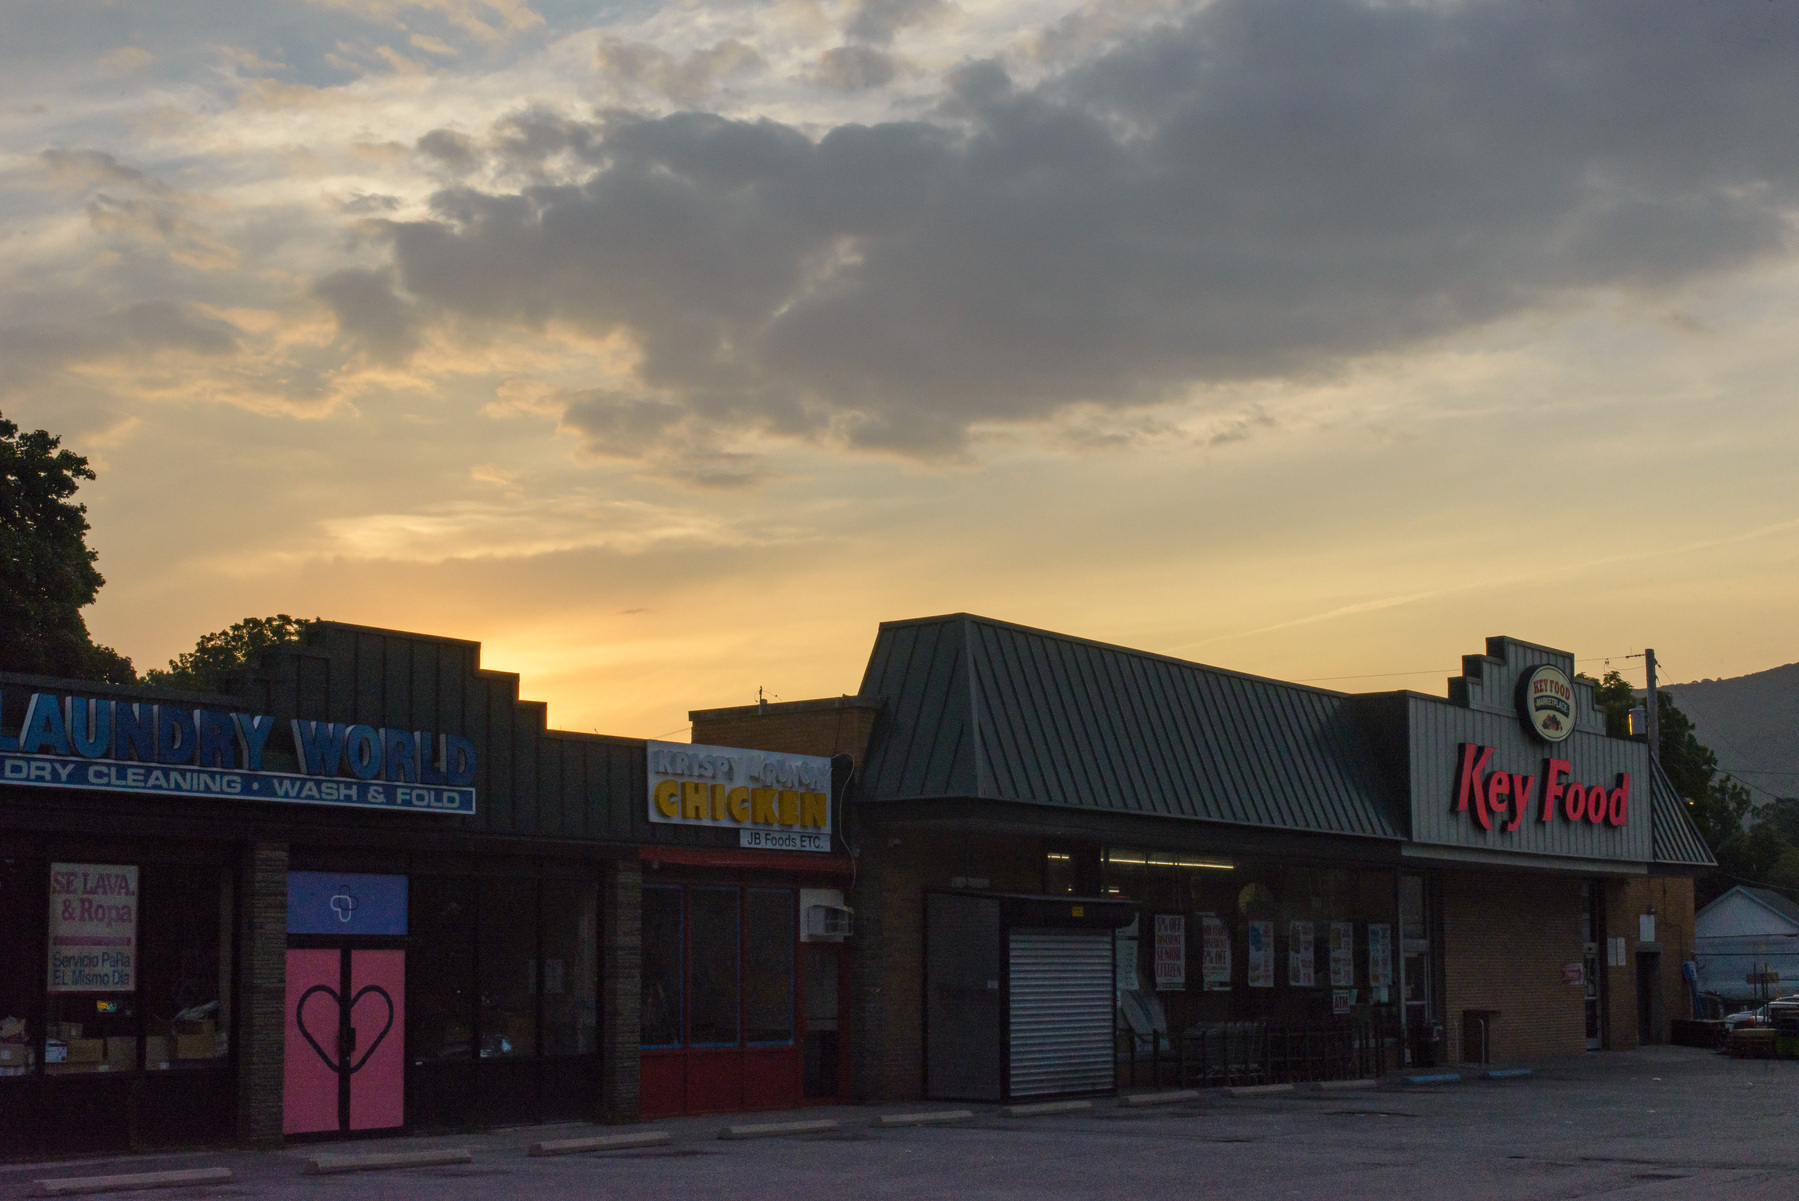 Sunrise cloudscape above a Key Food grocery store and neighboring shops.